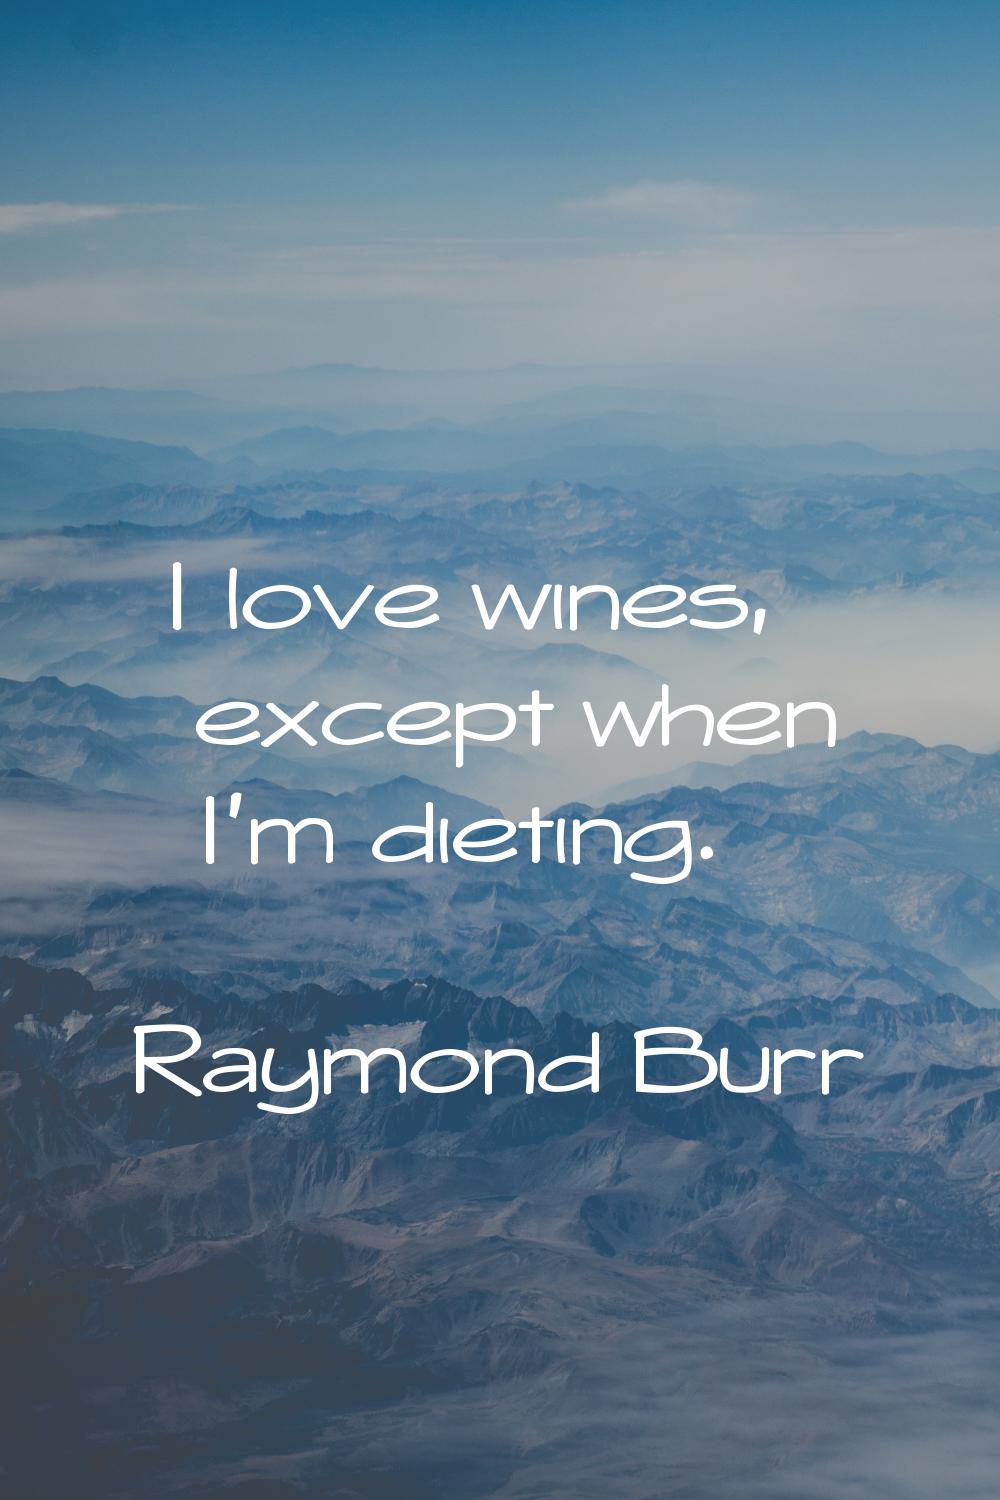 I love wines, except when I'm dieting.